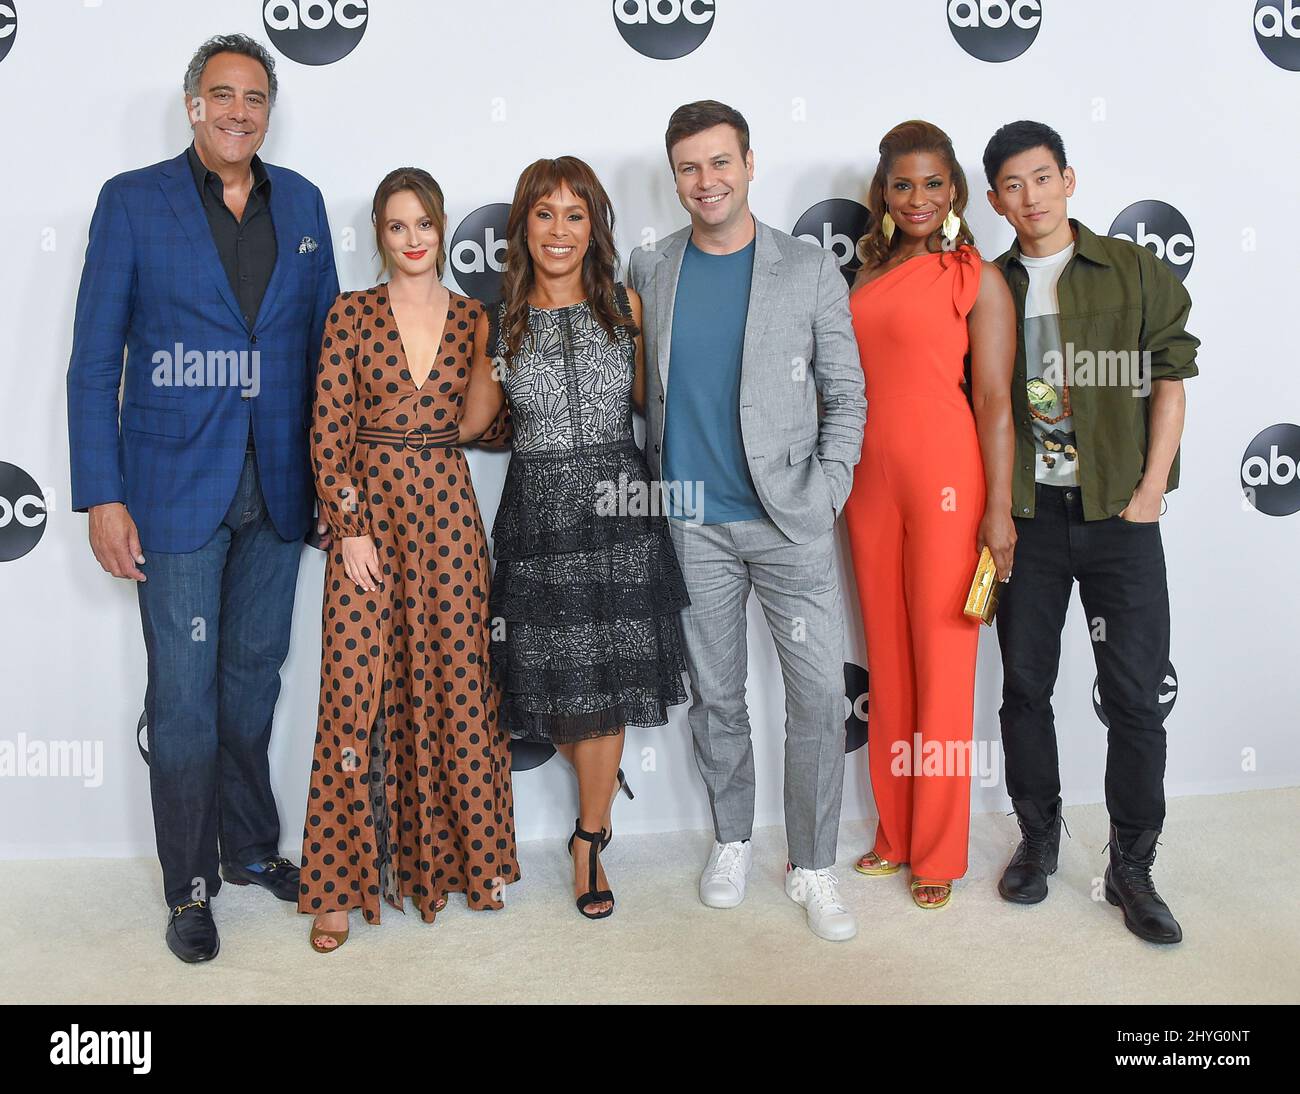 Brad Garrett, Leighton Meester, Channing Dungey, Taran Killam, Kimrie Lewis-Davis and Jake Choi at ABC's TCA Summer Press Tour white carpet event held at the Beverly Hilton Hotel on August 7, 2018 in Beverly Hills, CA. Stock Photo